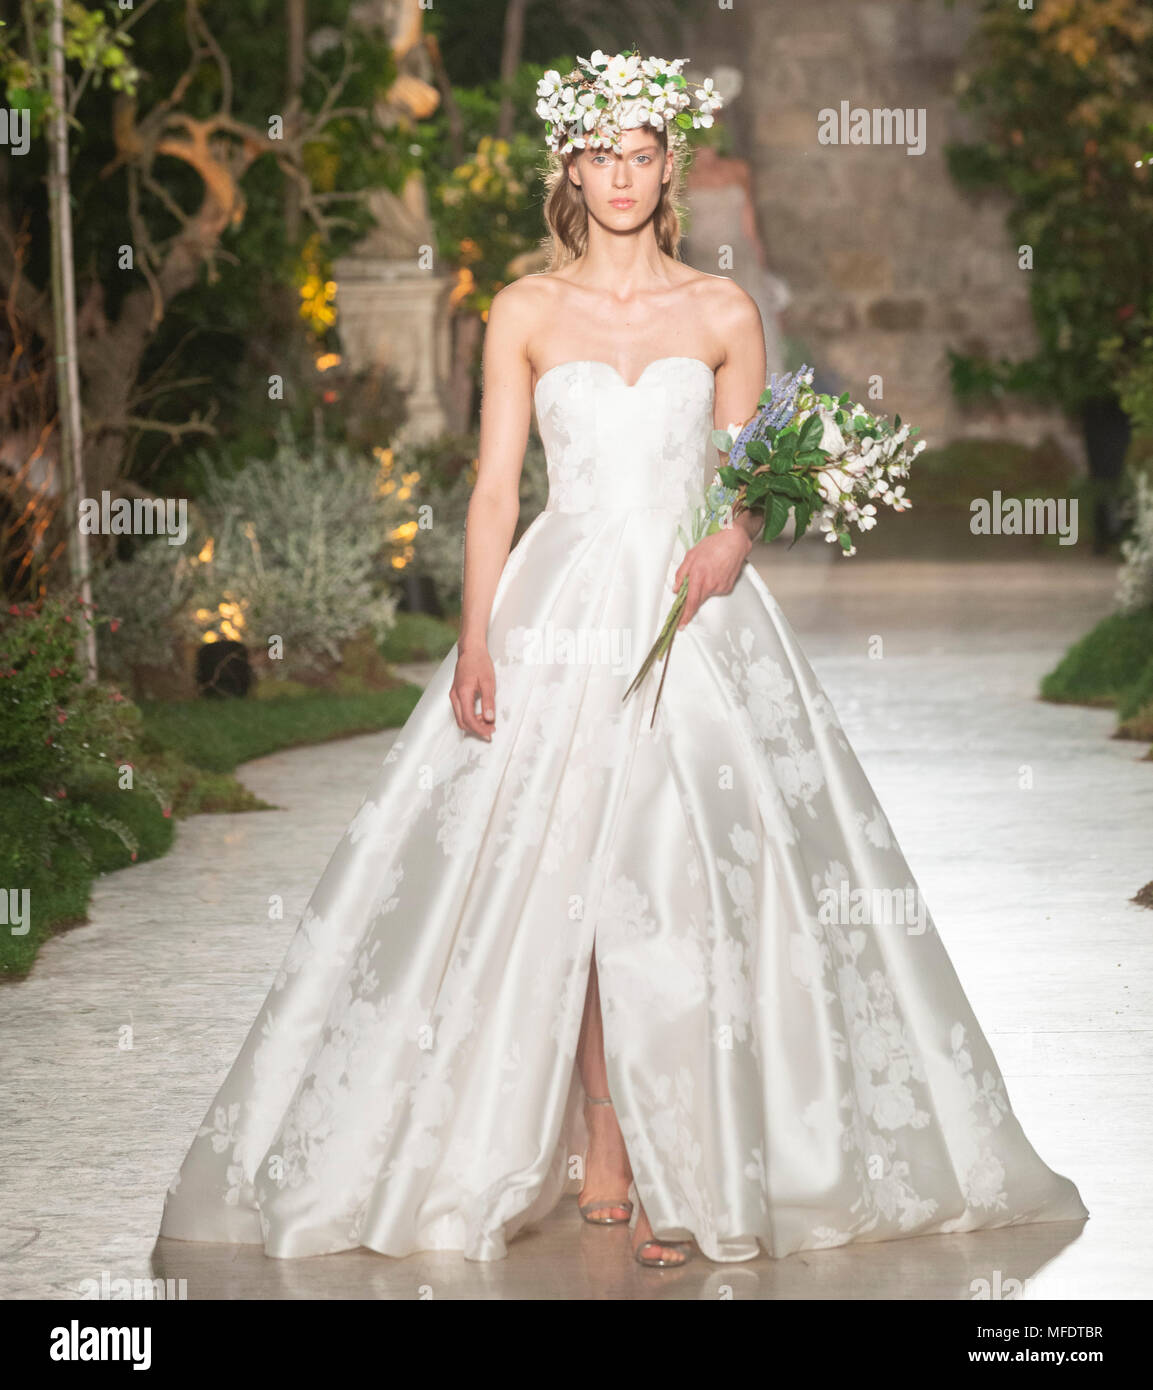 Barcelona, Spain. 25th April, 2018. A model showcases designs by Reem Acra on the show during Barcelona Bridal Fashion Week 2018 at Fira de Barcelona on April 25, 2018 in Barcelona, Spain. © Victor Puig/Alamy Live News Stock Photo